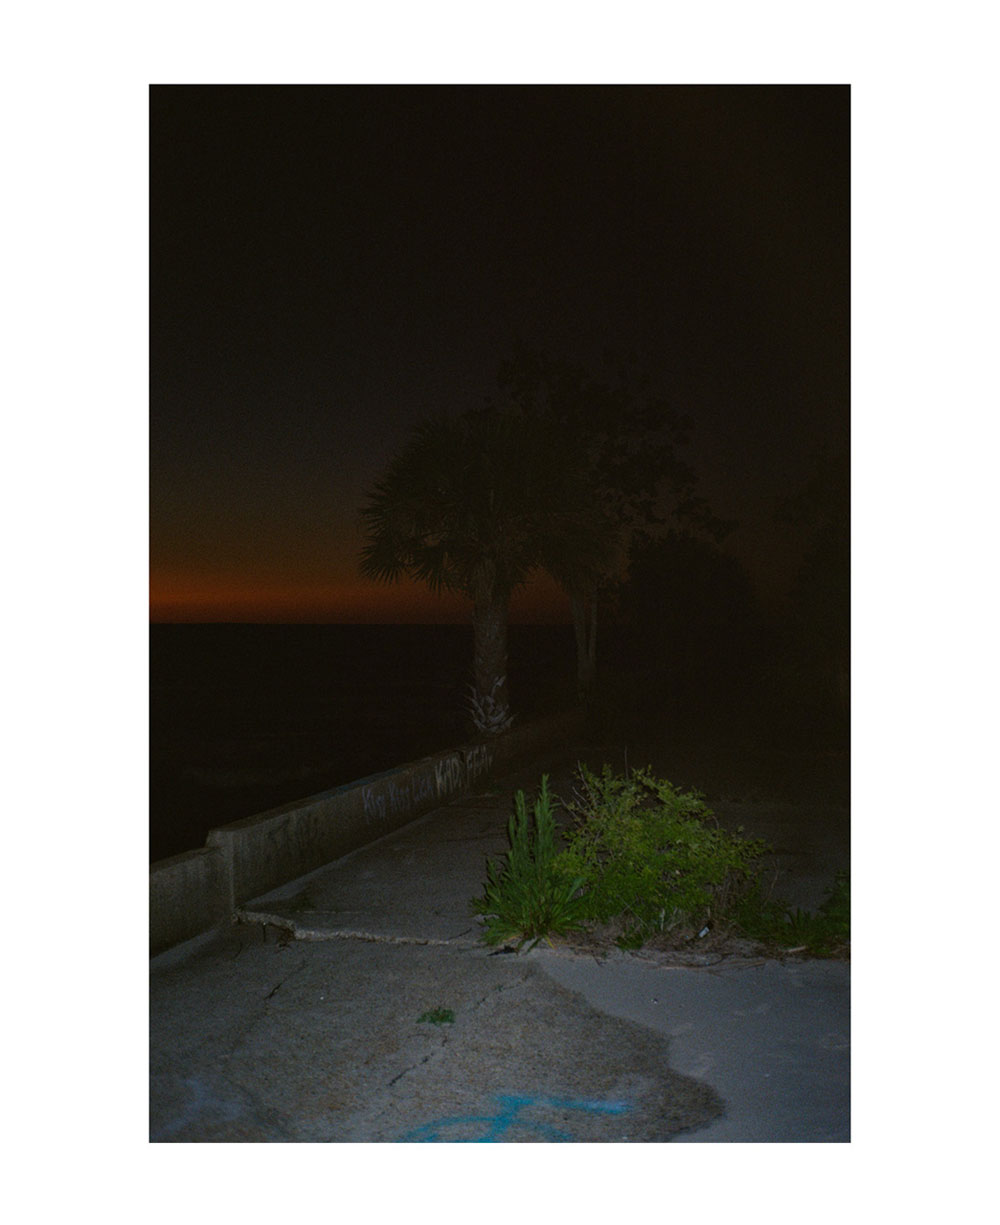 A photograph of a street at night. In the foreground, there's a two-foot high weed growing from the cracks of the concrete. In the background, there's a palm tree. The sky is black, with a sliver of orange near the horizon.